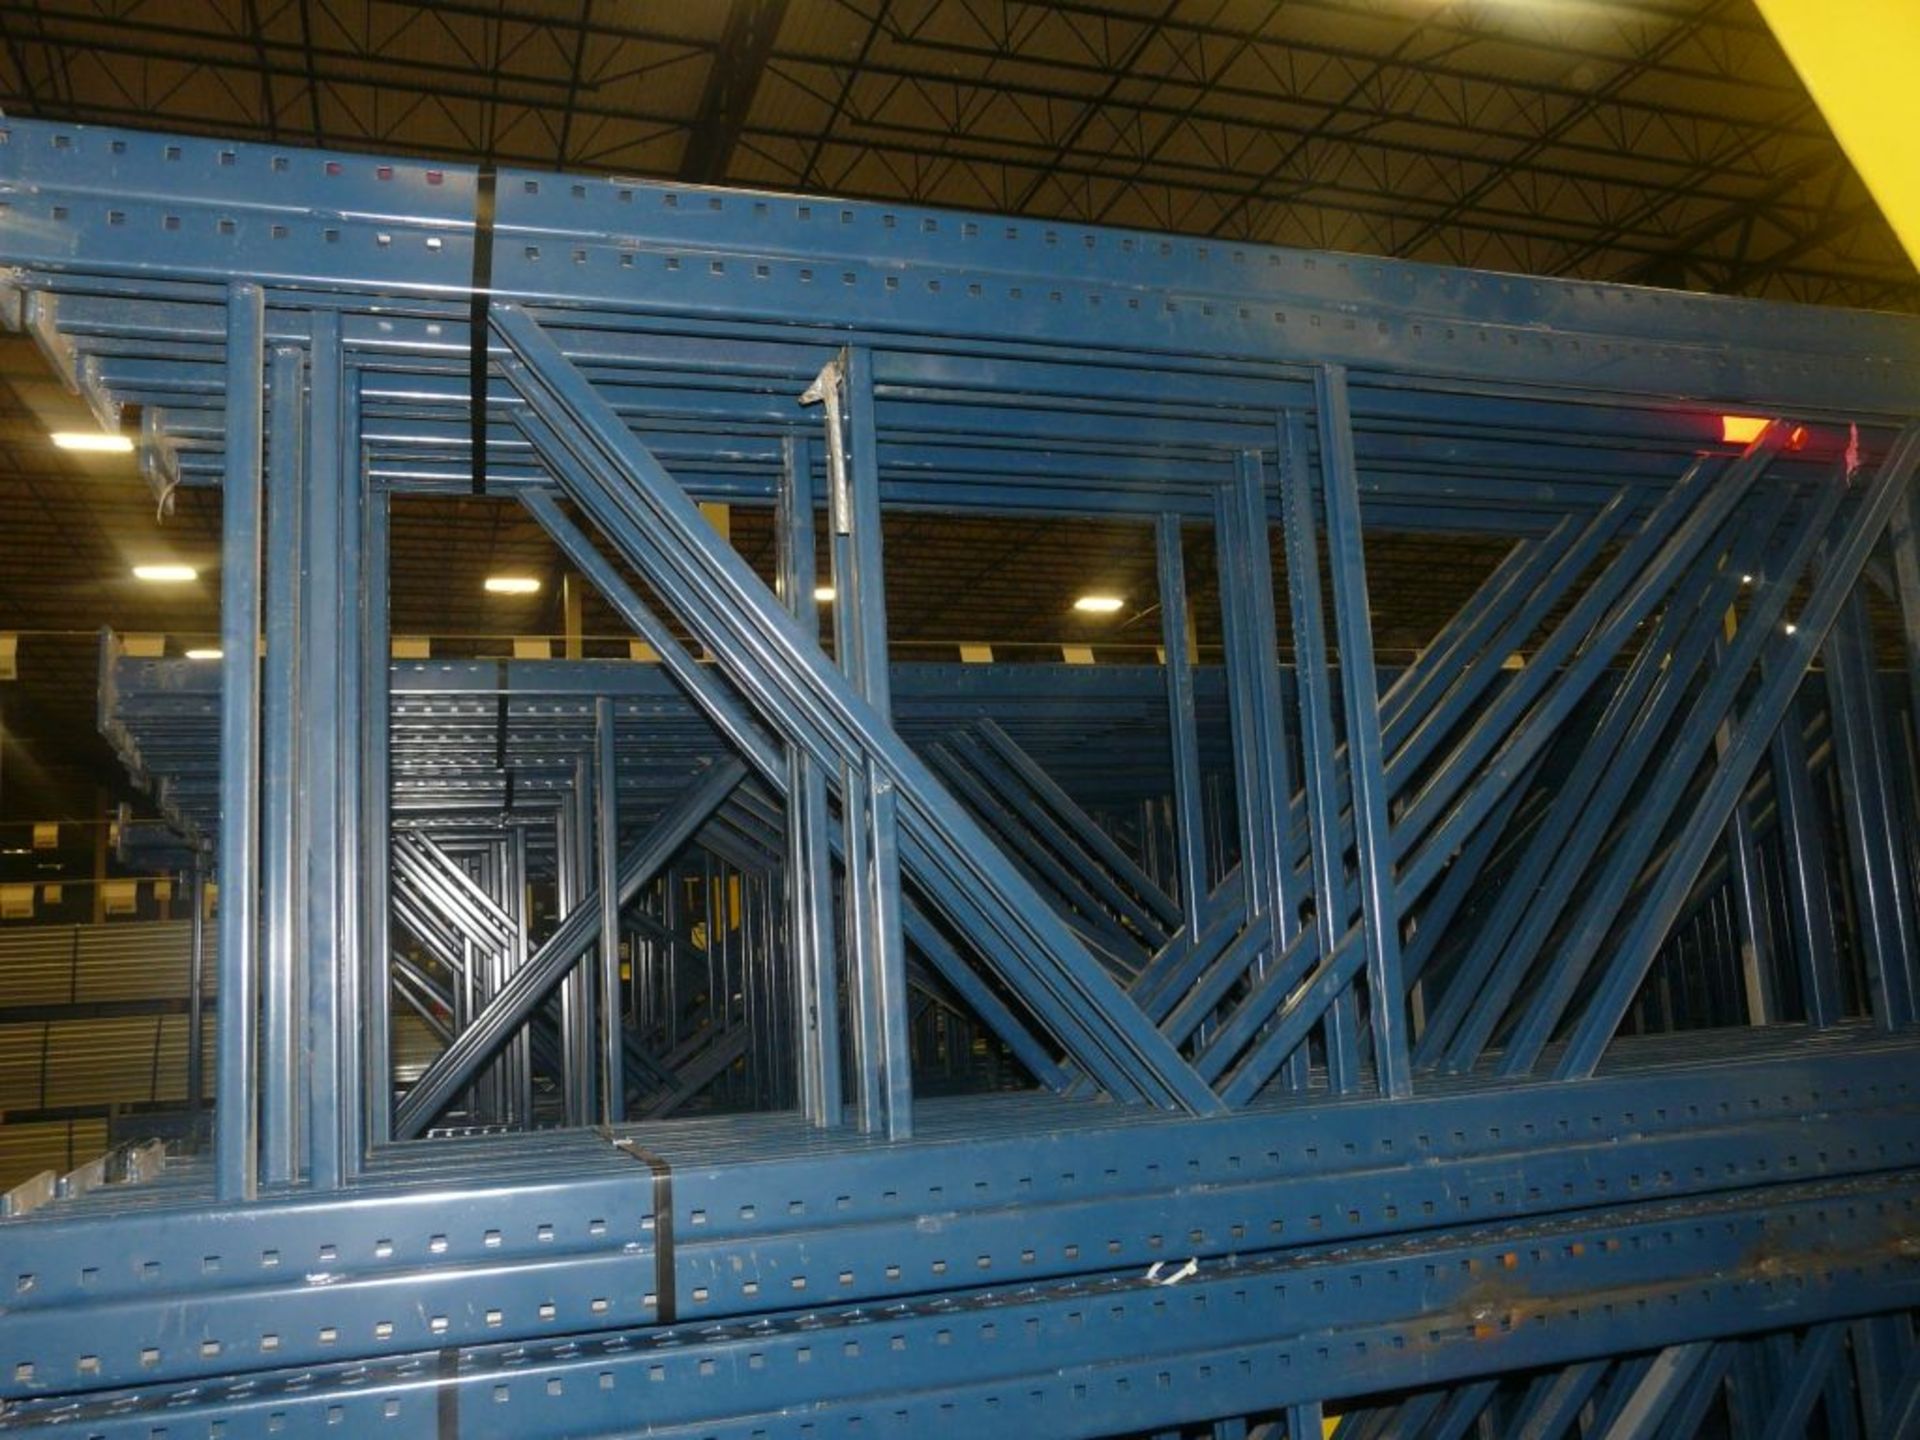 Lot of (10) 29'H x 48"W Double Column Uprights with 11' Second Column - Tag: 224168 - $30 Lot - Image 3 of 3